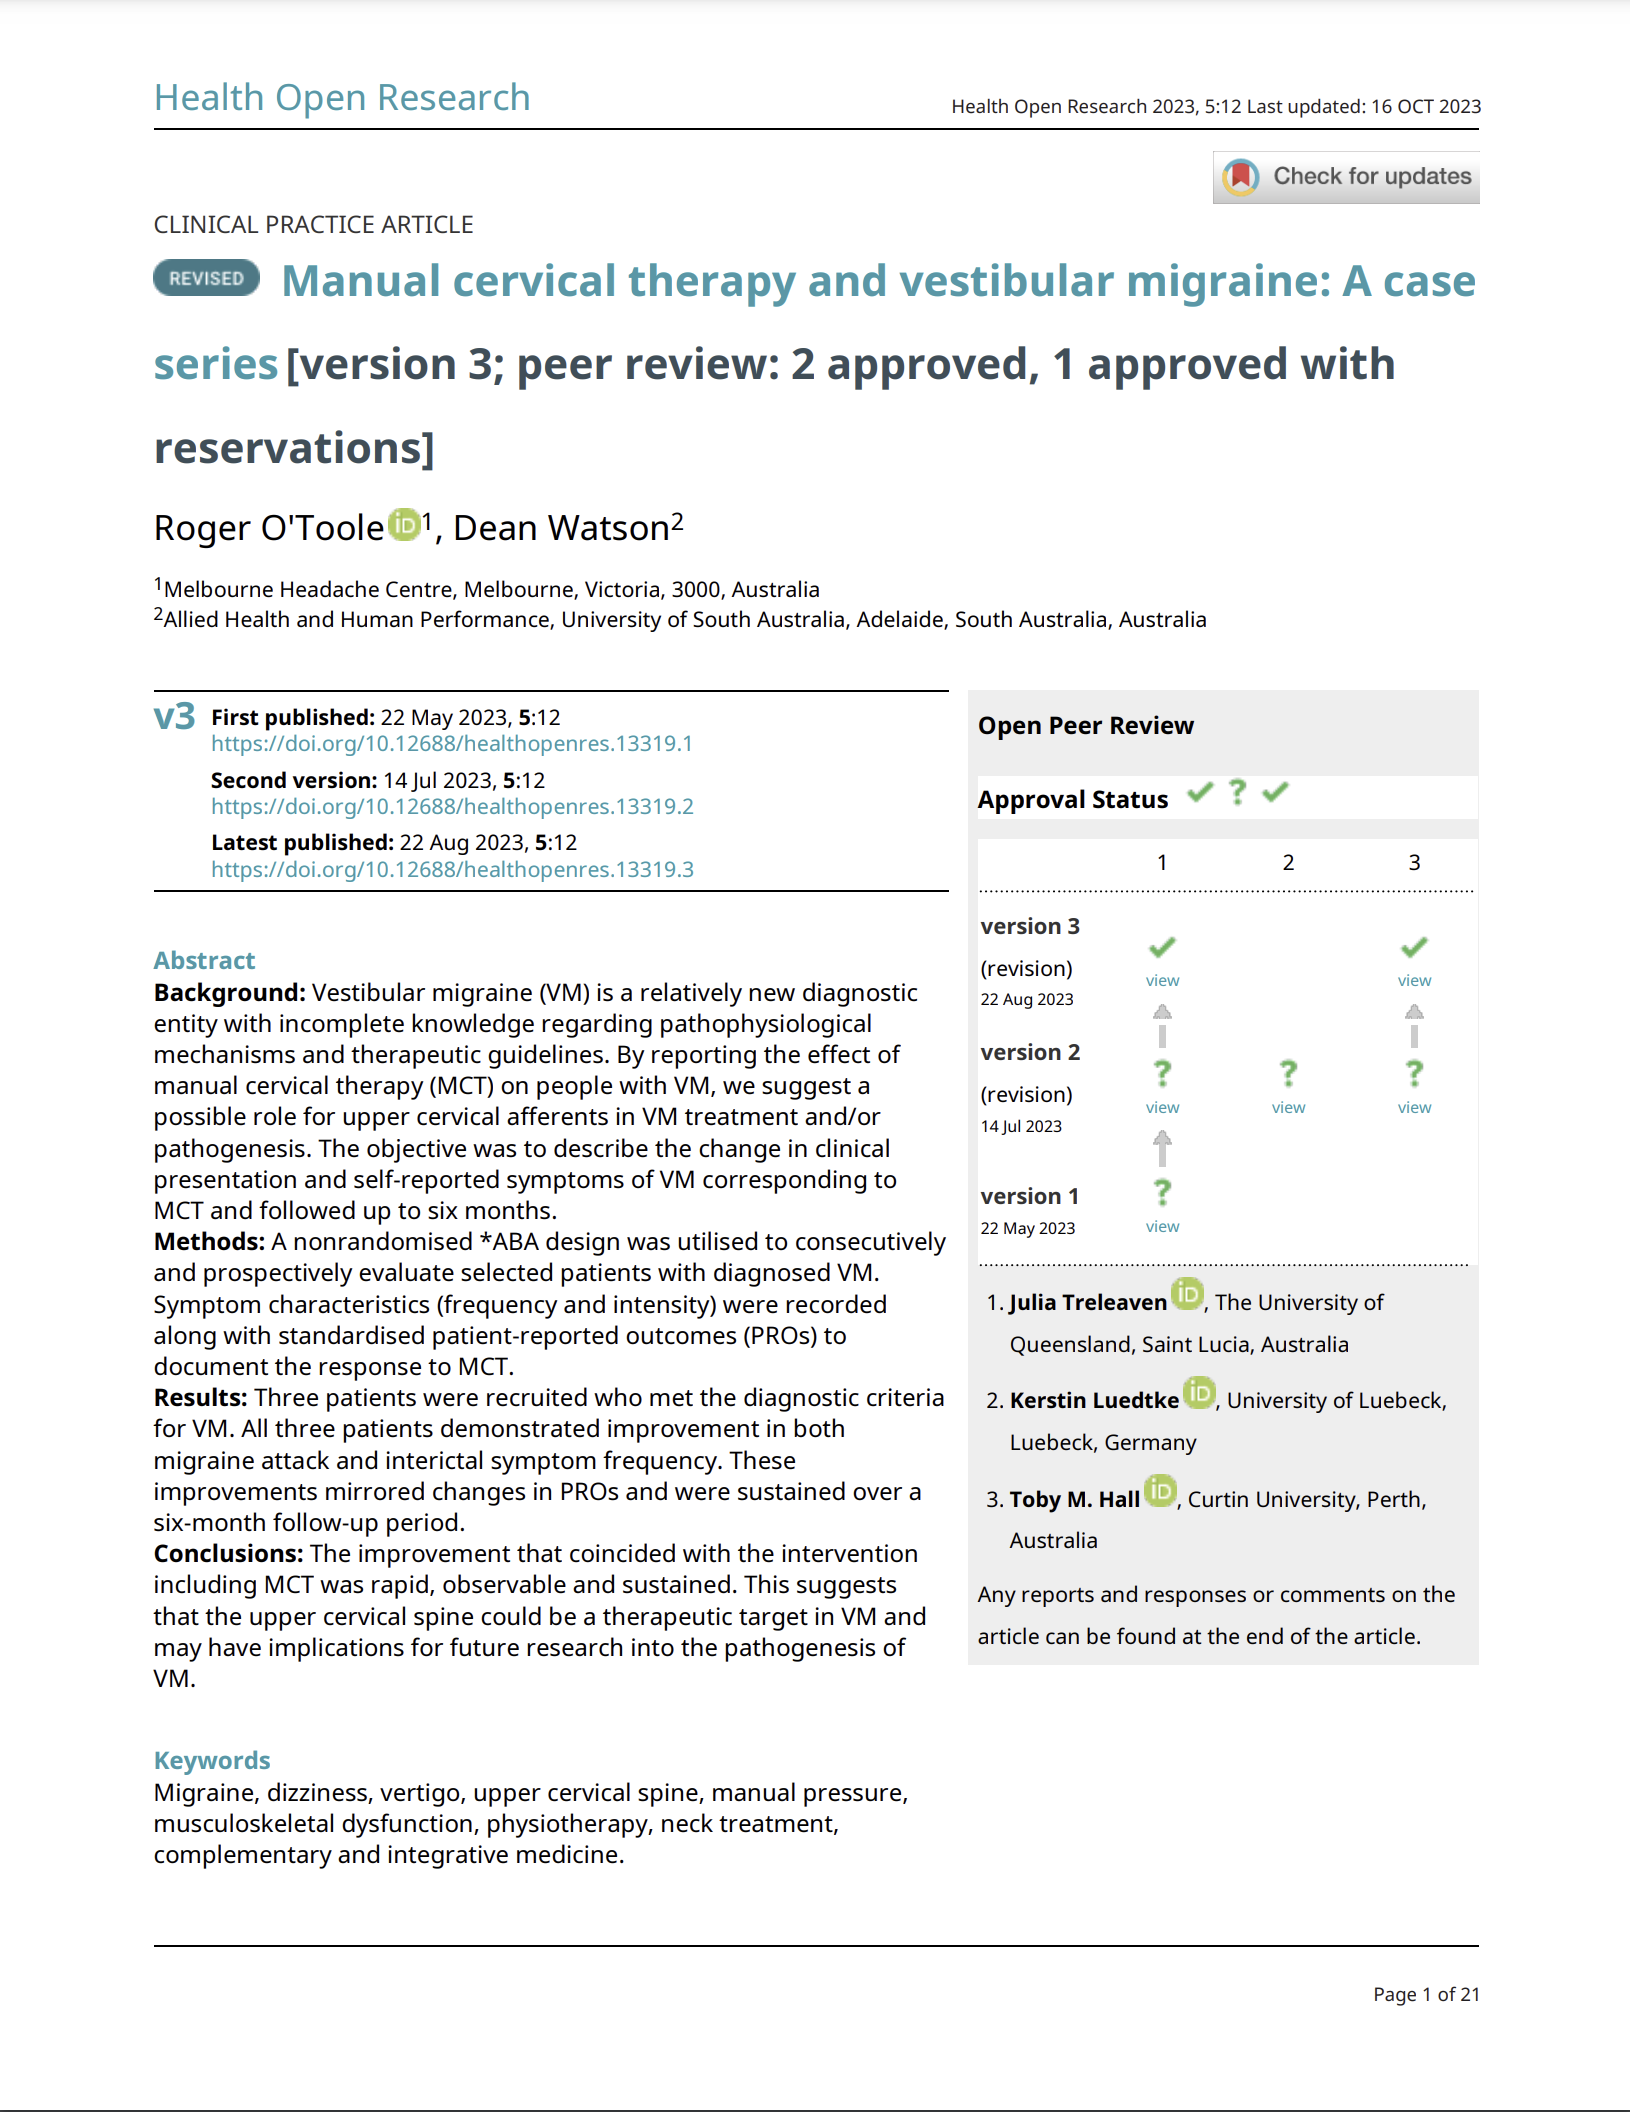 Image is the first page of a peer reviewed manuscript titled Manual Cervical Therapy and vestibular Migraine, written by Roger O'Toole and Dean Watson. Published in Health Open research and under open peer review lists the reviewers, Julia Treleaven, Kerstin Luedtke and Toby Hall.